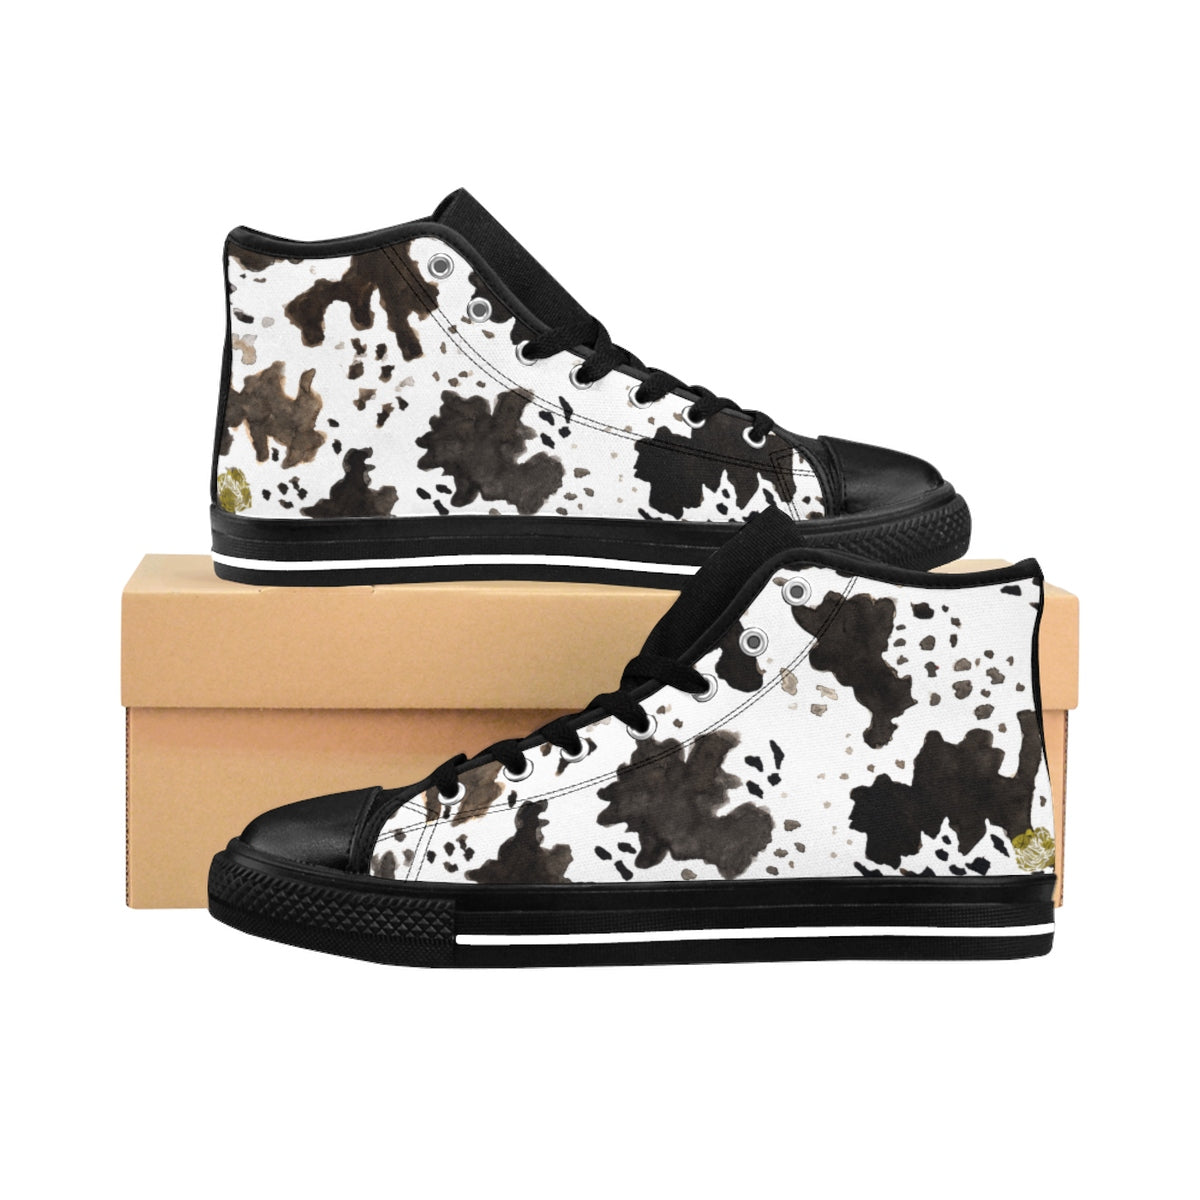 Milk Cow Print White Brown Black 5" Calf Height Women's High-Top Sneakers Running Shoes, (US Size: 6-12)-Women's High Top Sneakers-Black-US 9-Heidi Kimura Art LLC